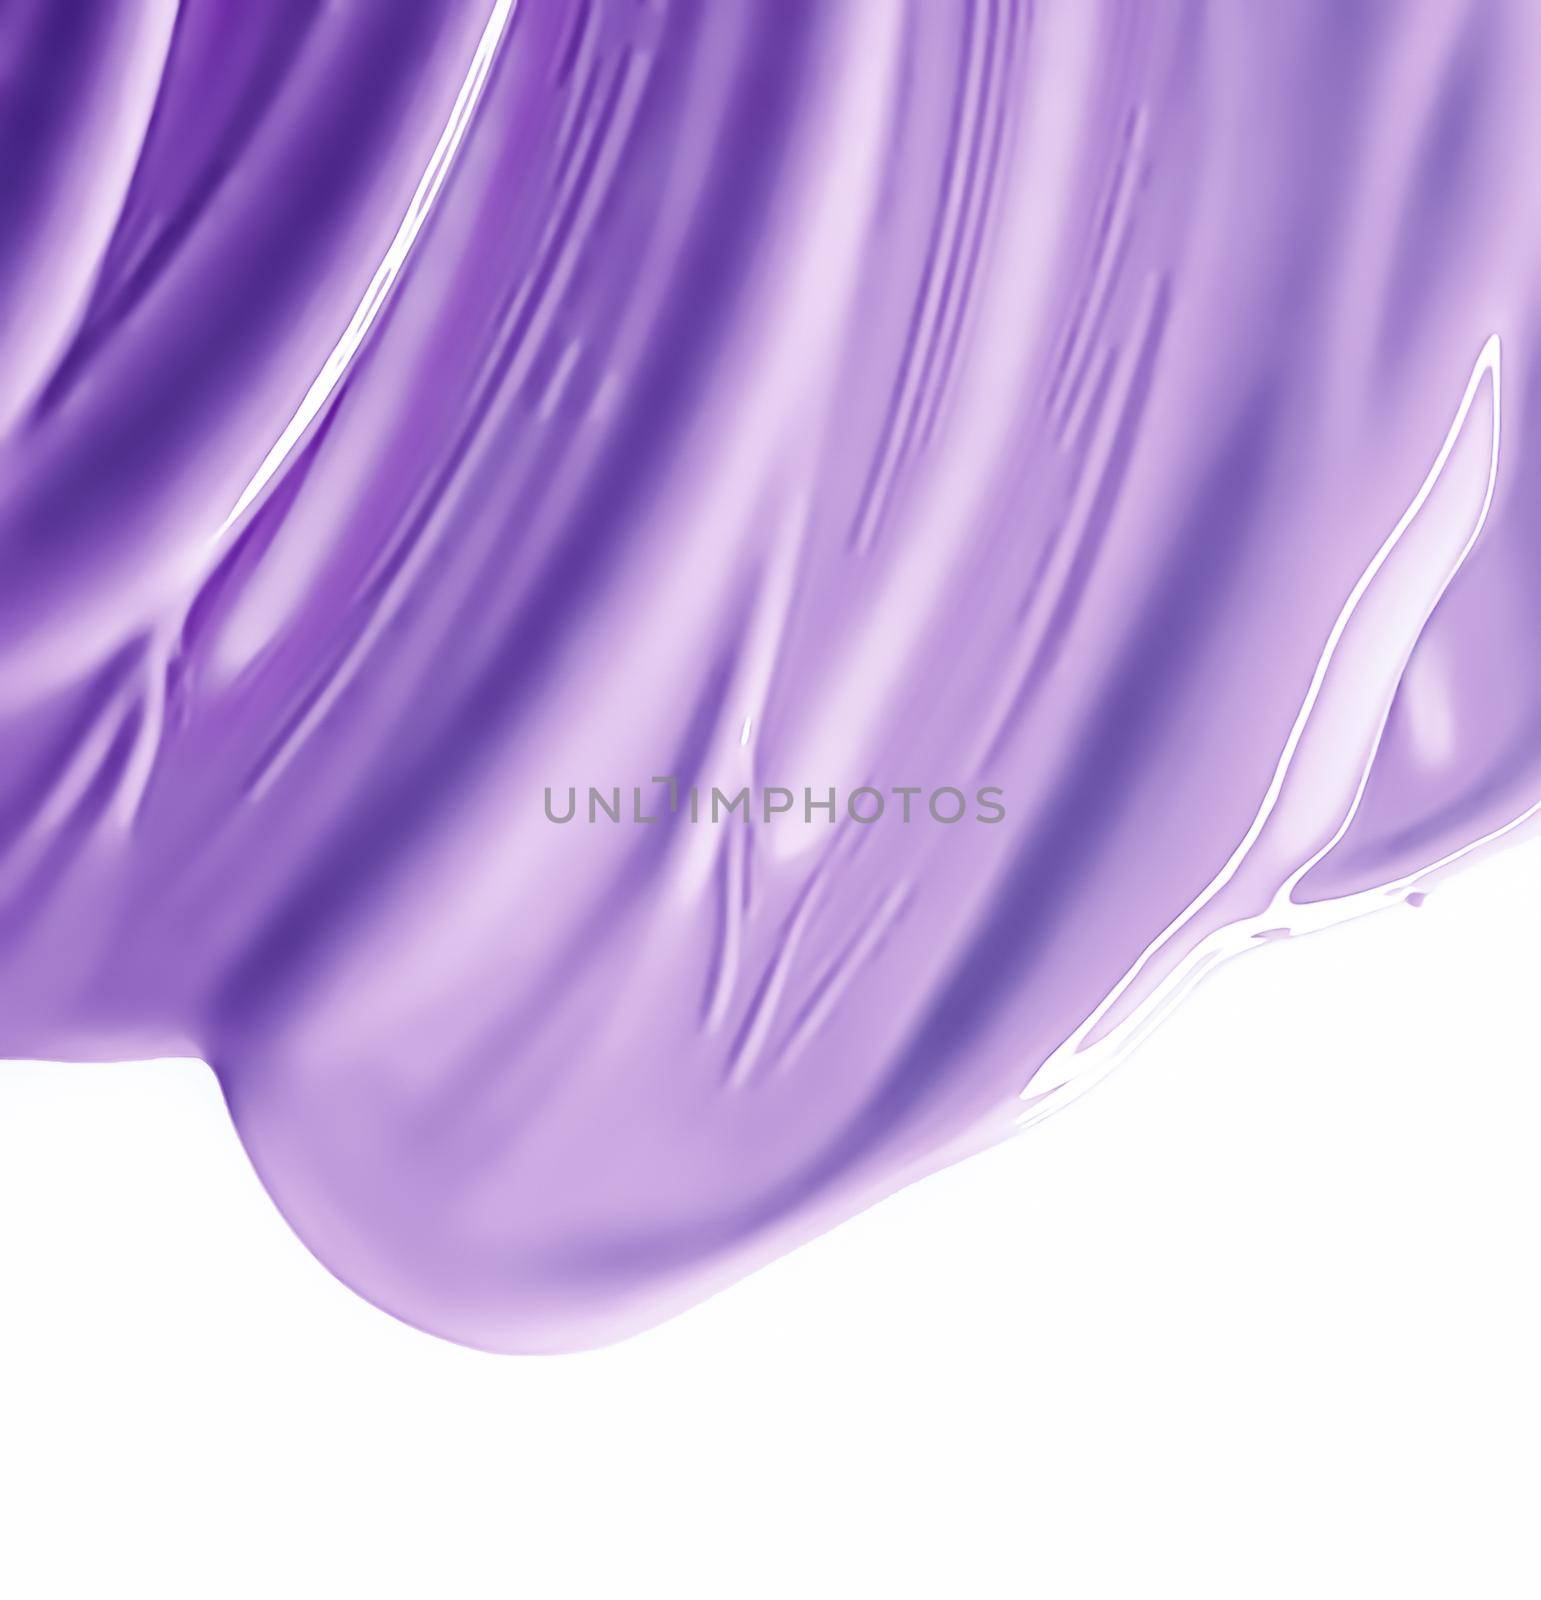 Glossy purple cosmetic texture as beauty make-up product background, cosmetics and luxury makeup brand design by Anneleven